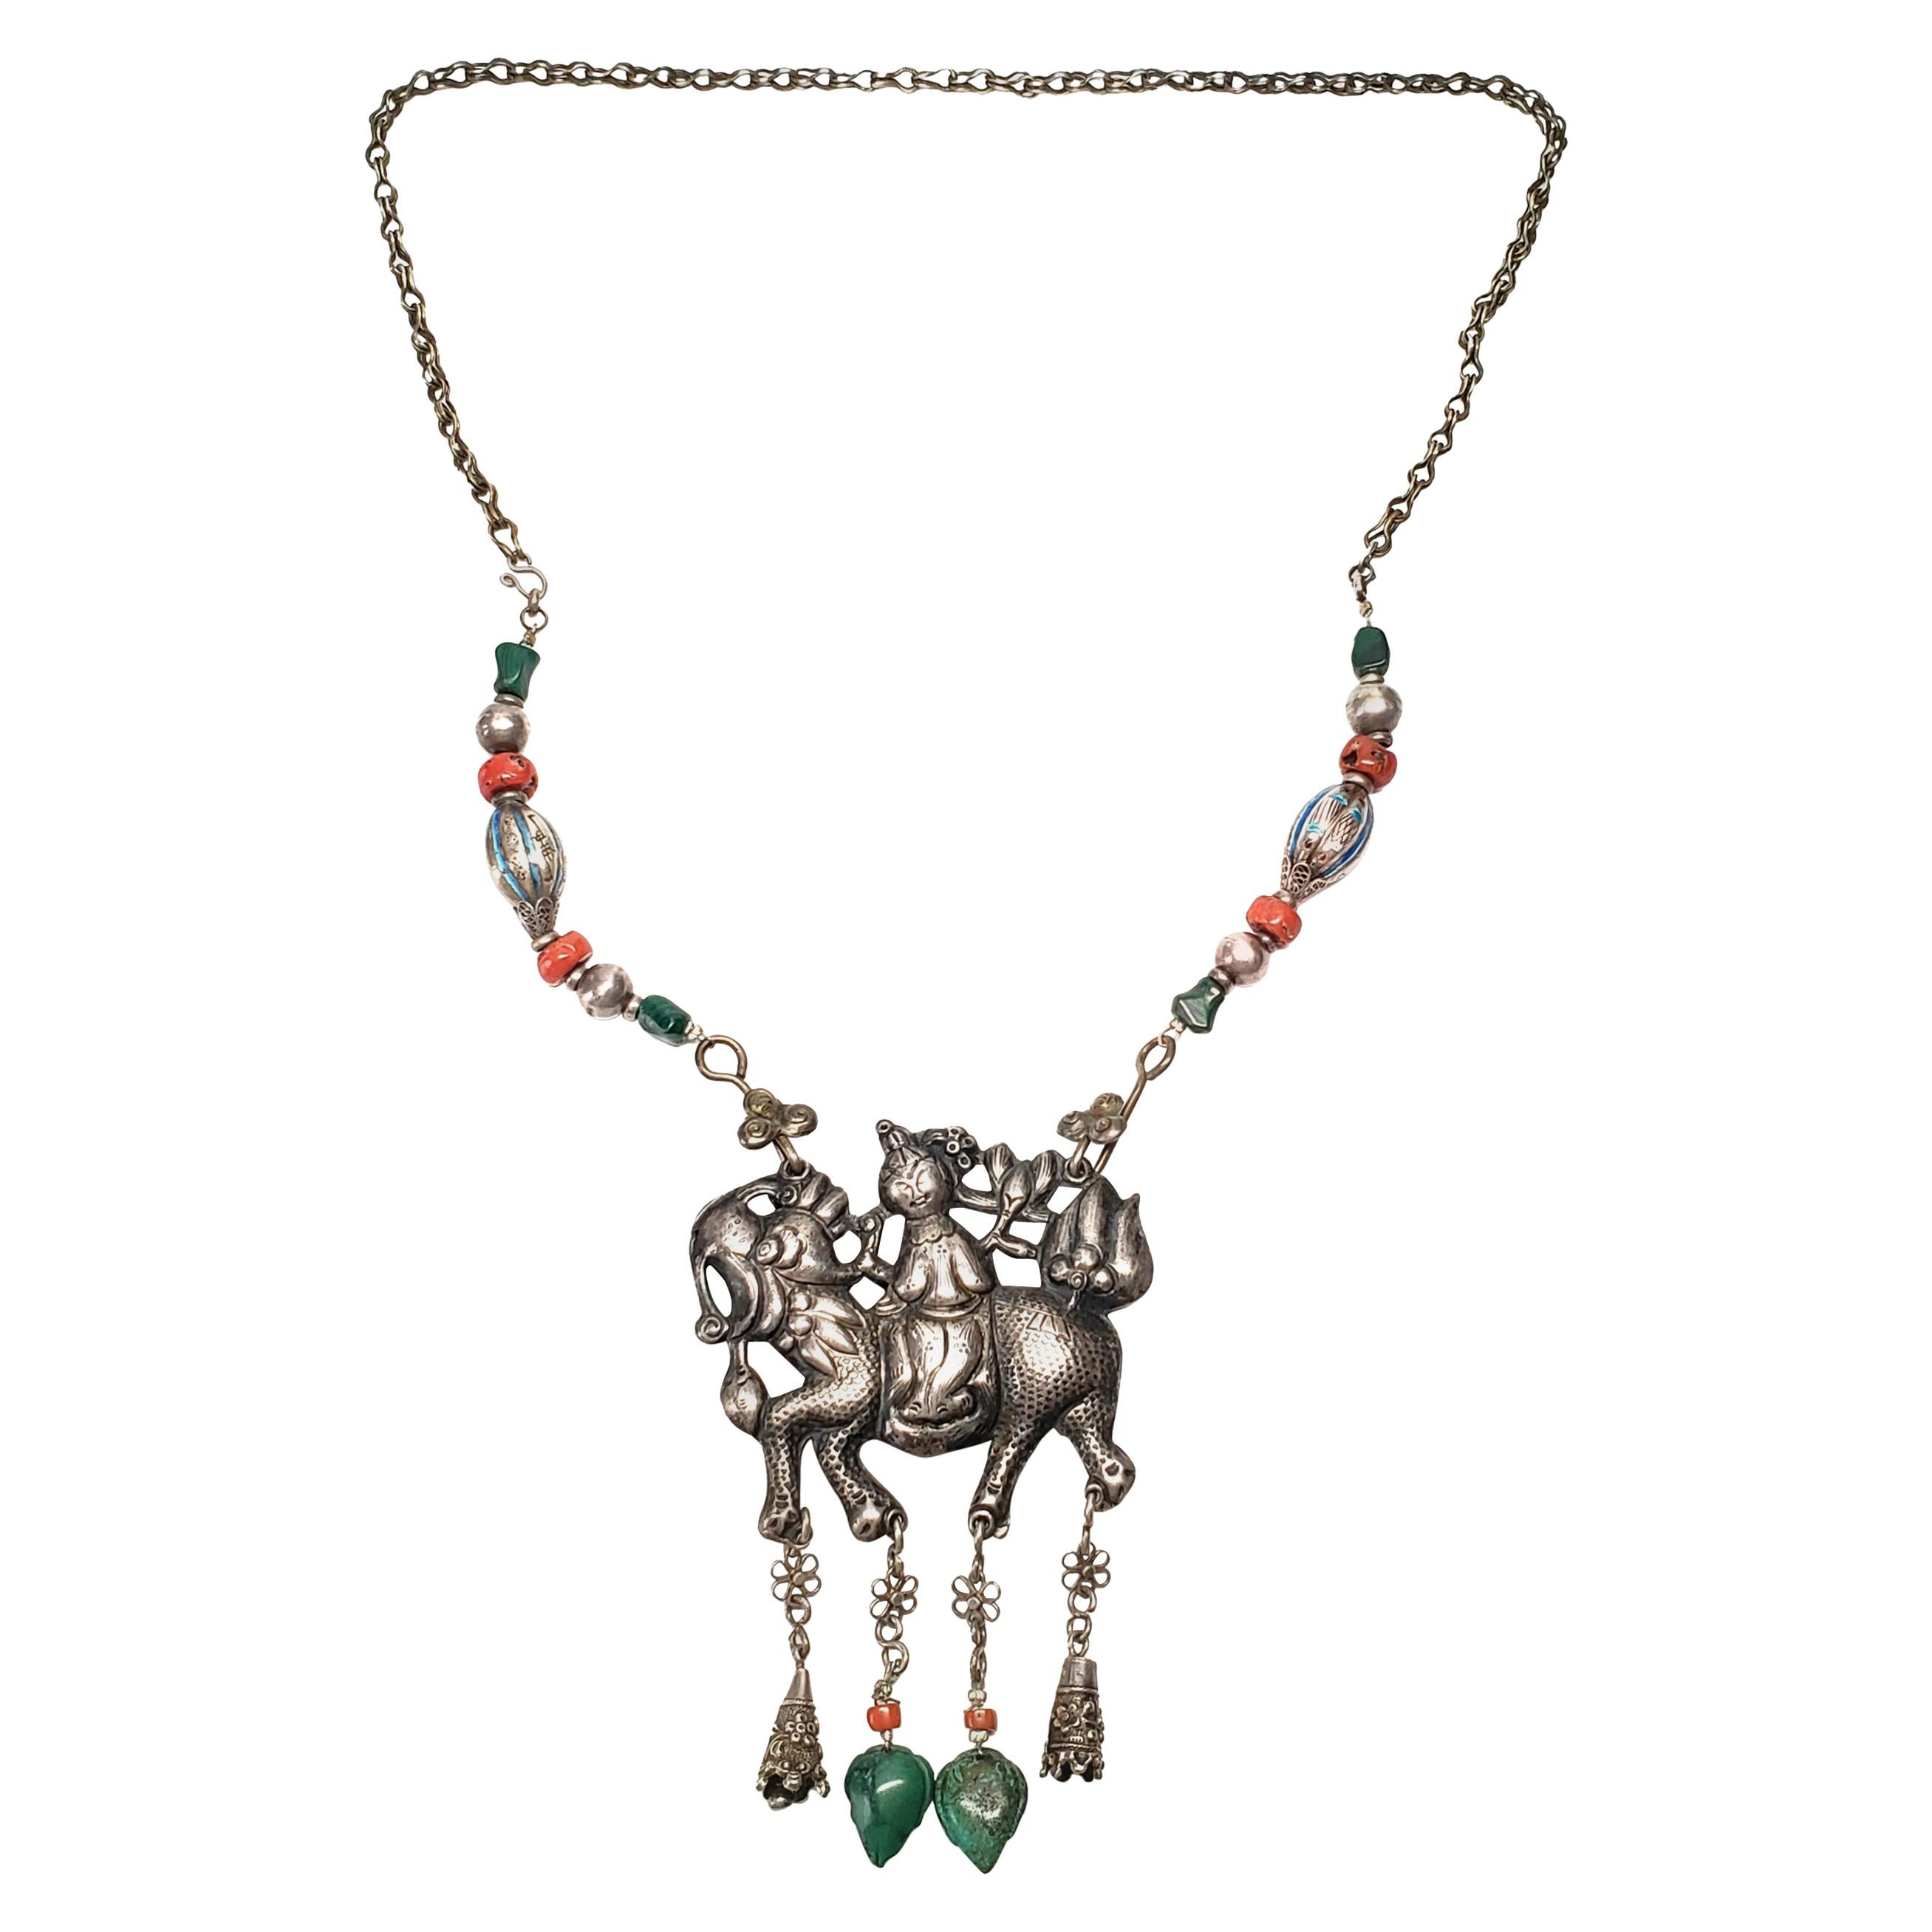 Chinese Silver Qilin Amulet Beaded Necklace